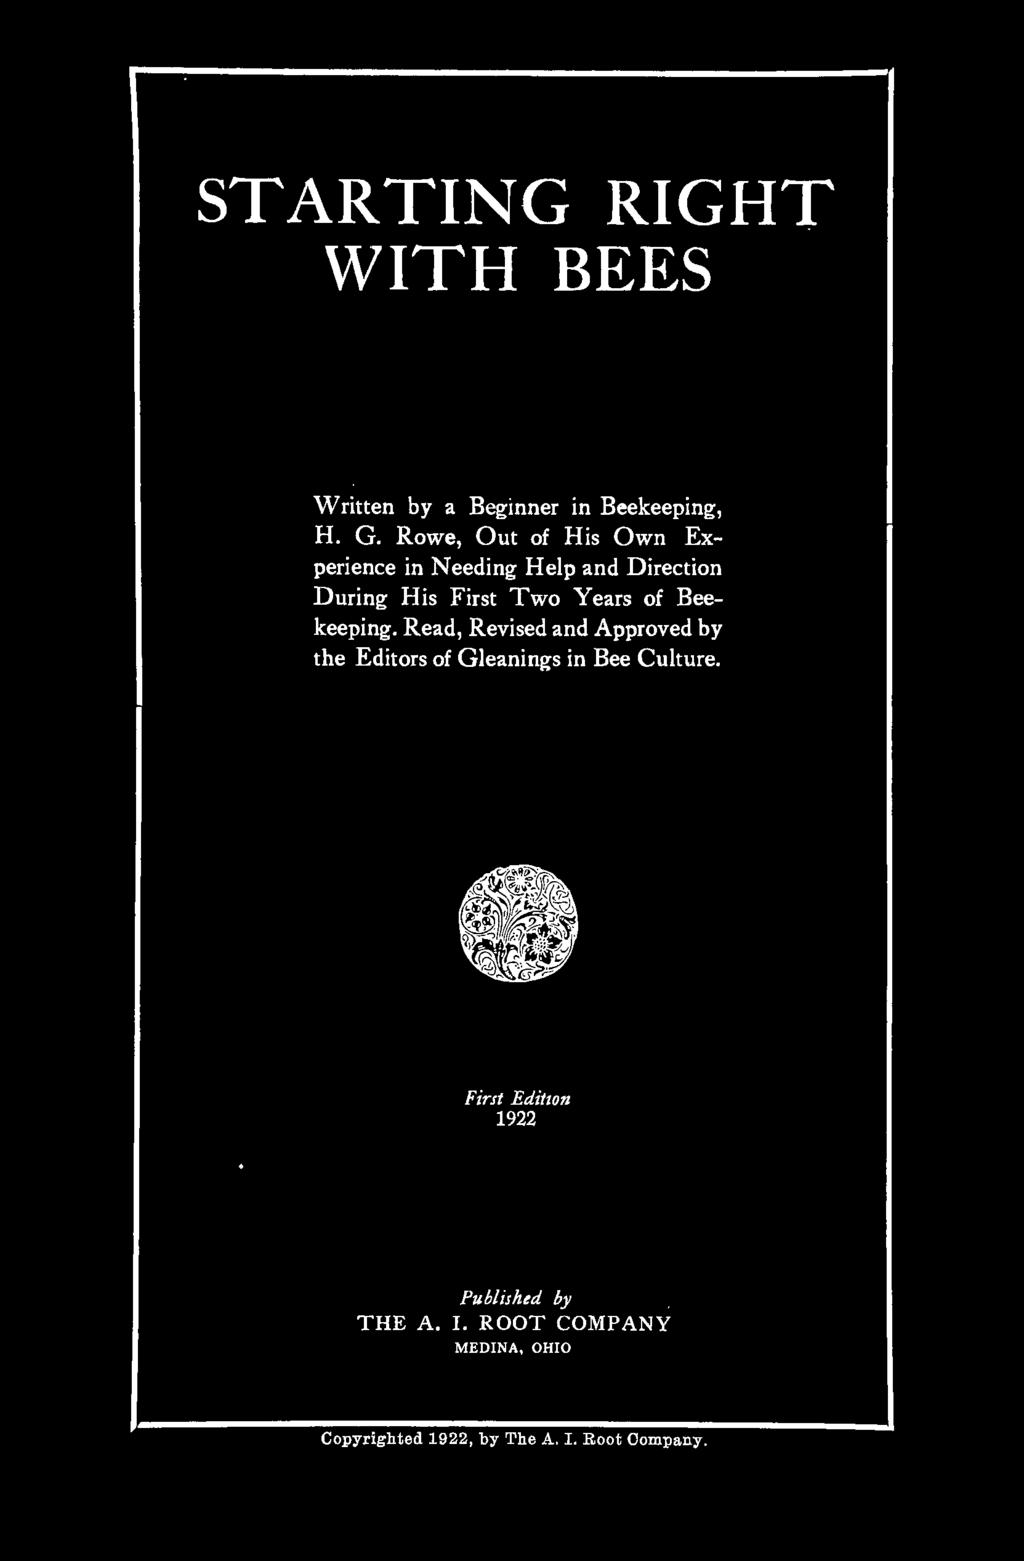 of Beekeeping. Read, Revised and Approved by the Editors of Gleanings in Bee Culture.